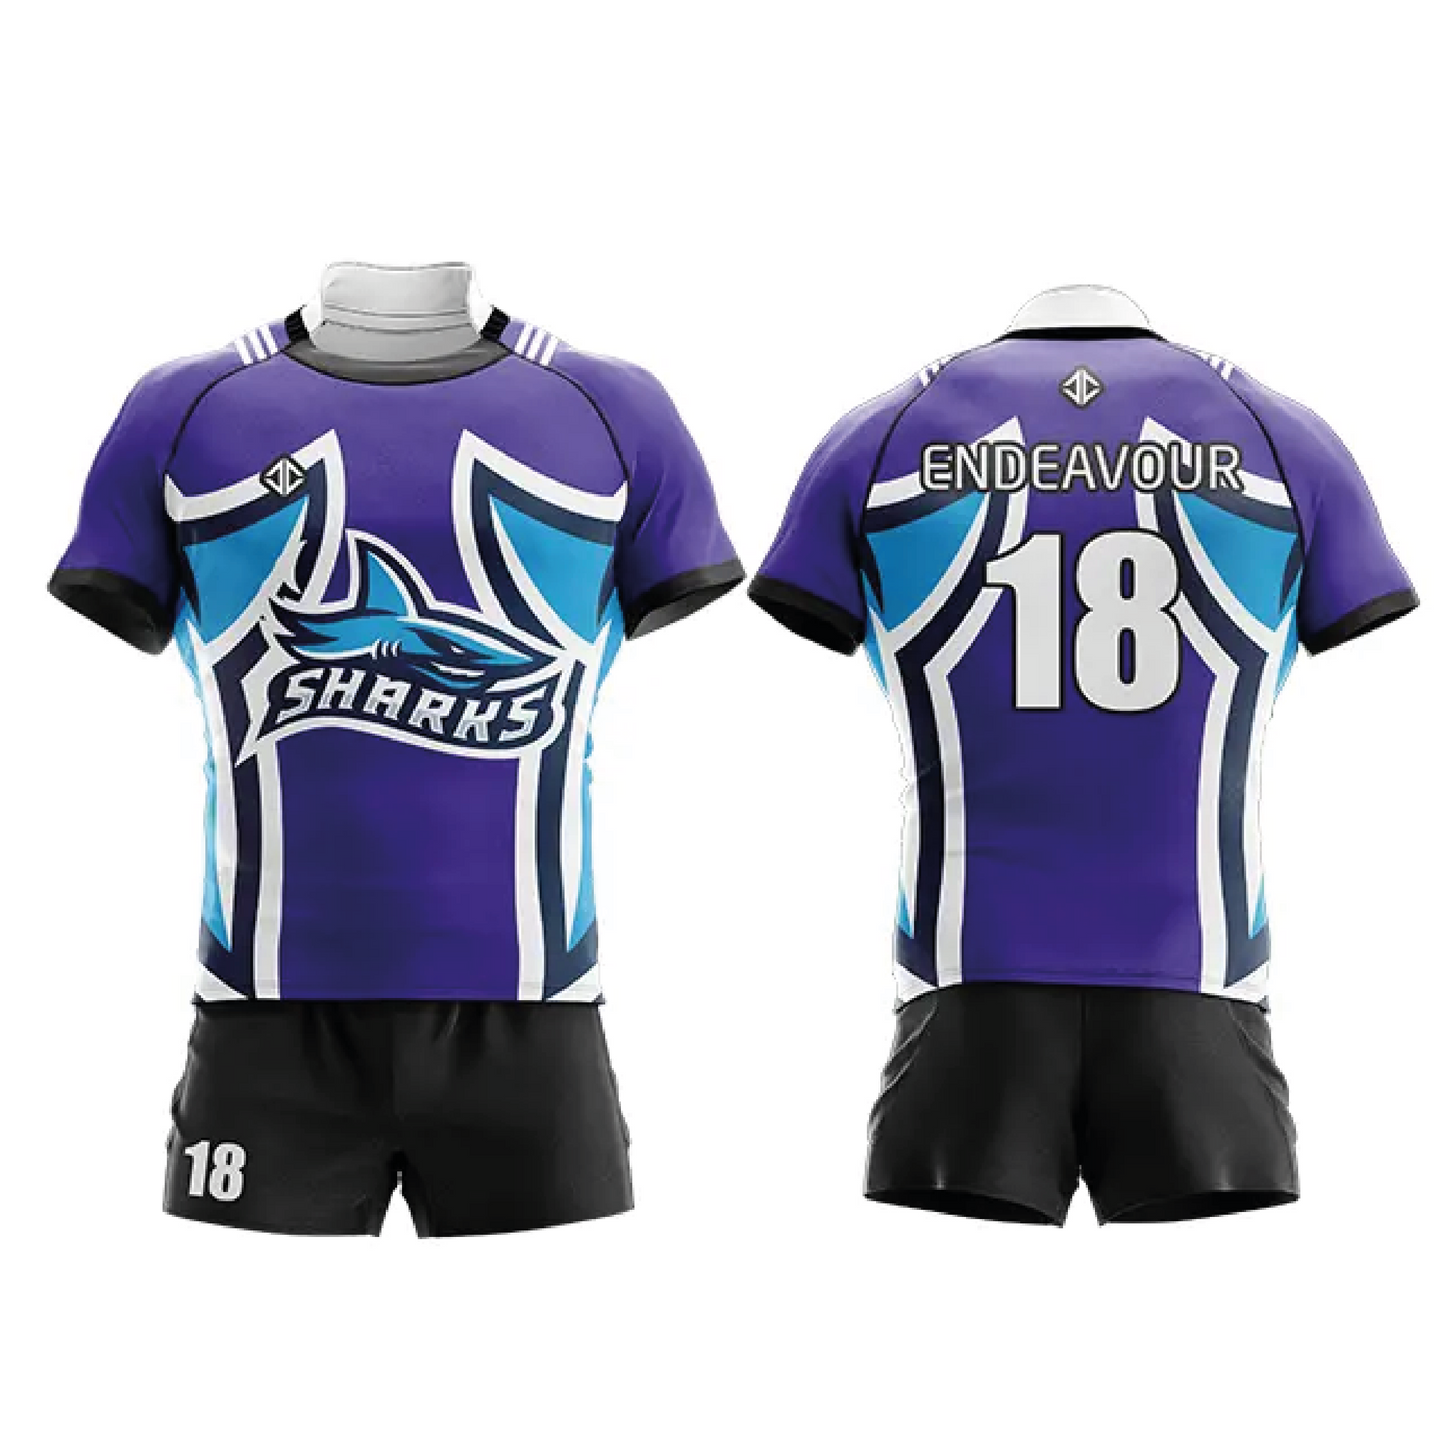 Kids Rugby Jersey